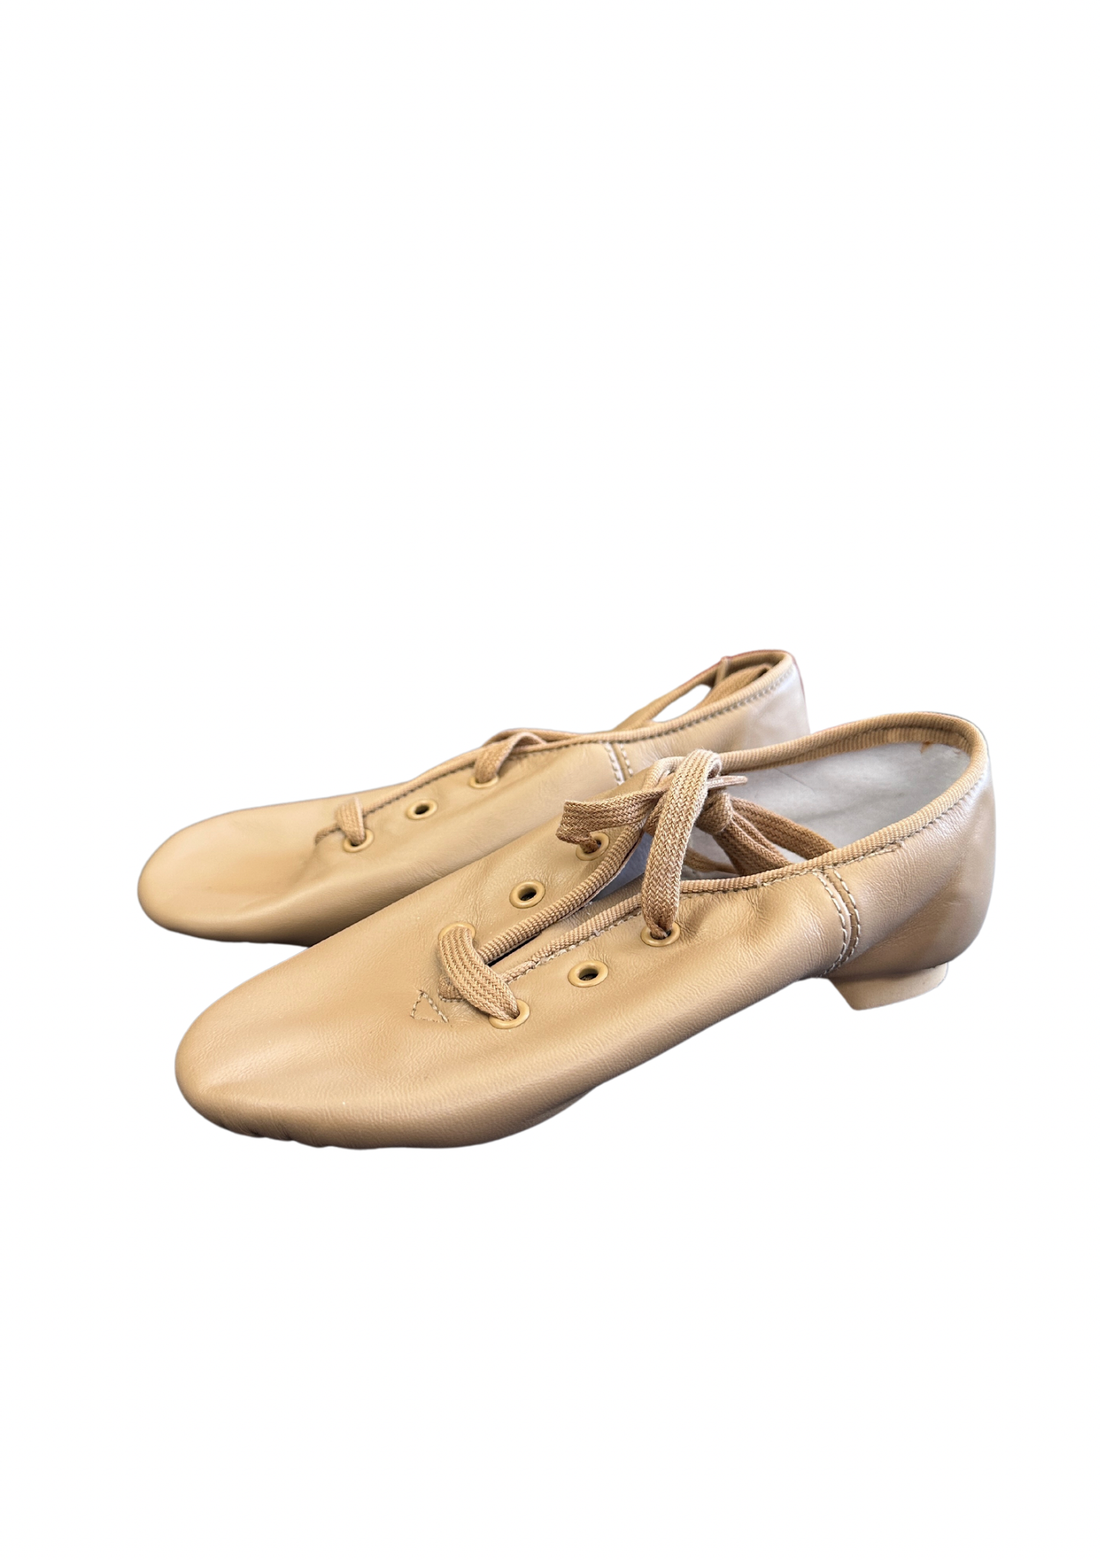 Capezio CG02 Caramel Split Sole Lace Up (Reduced to Clear)